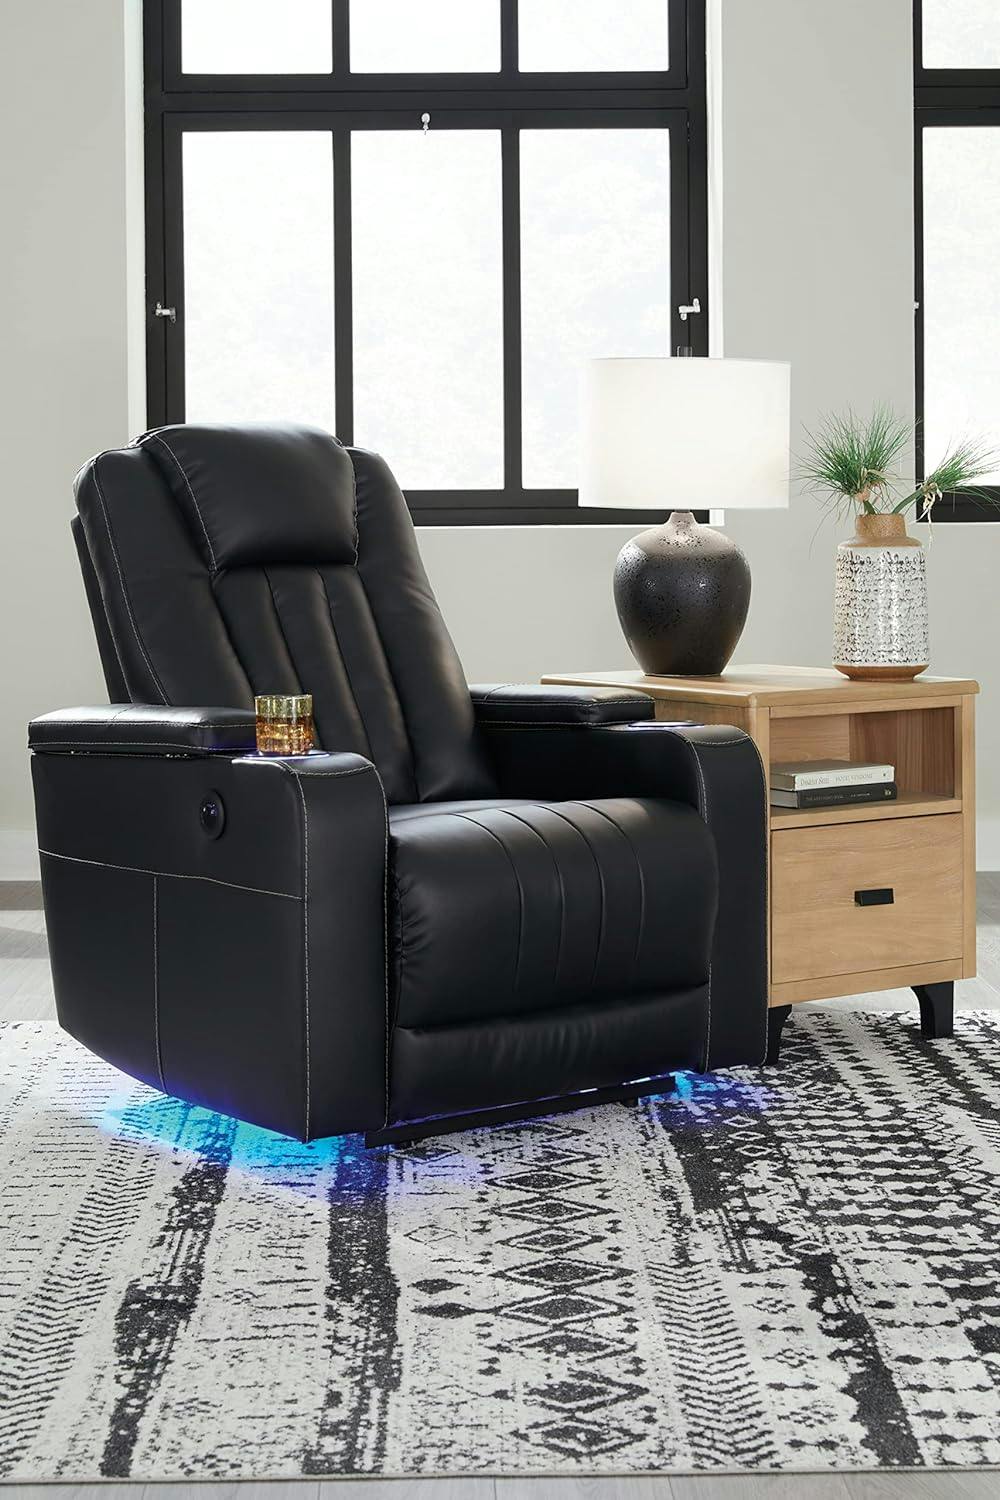 Contemporary Black Faux Leather LED Recliner 36"x41"x44"